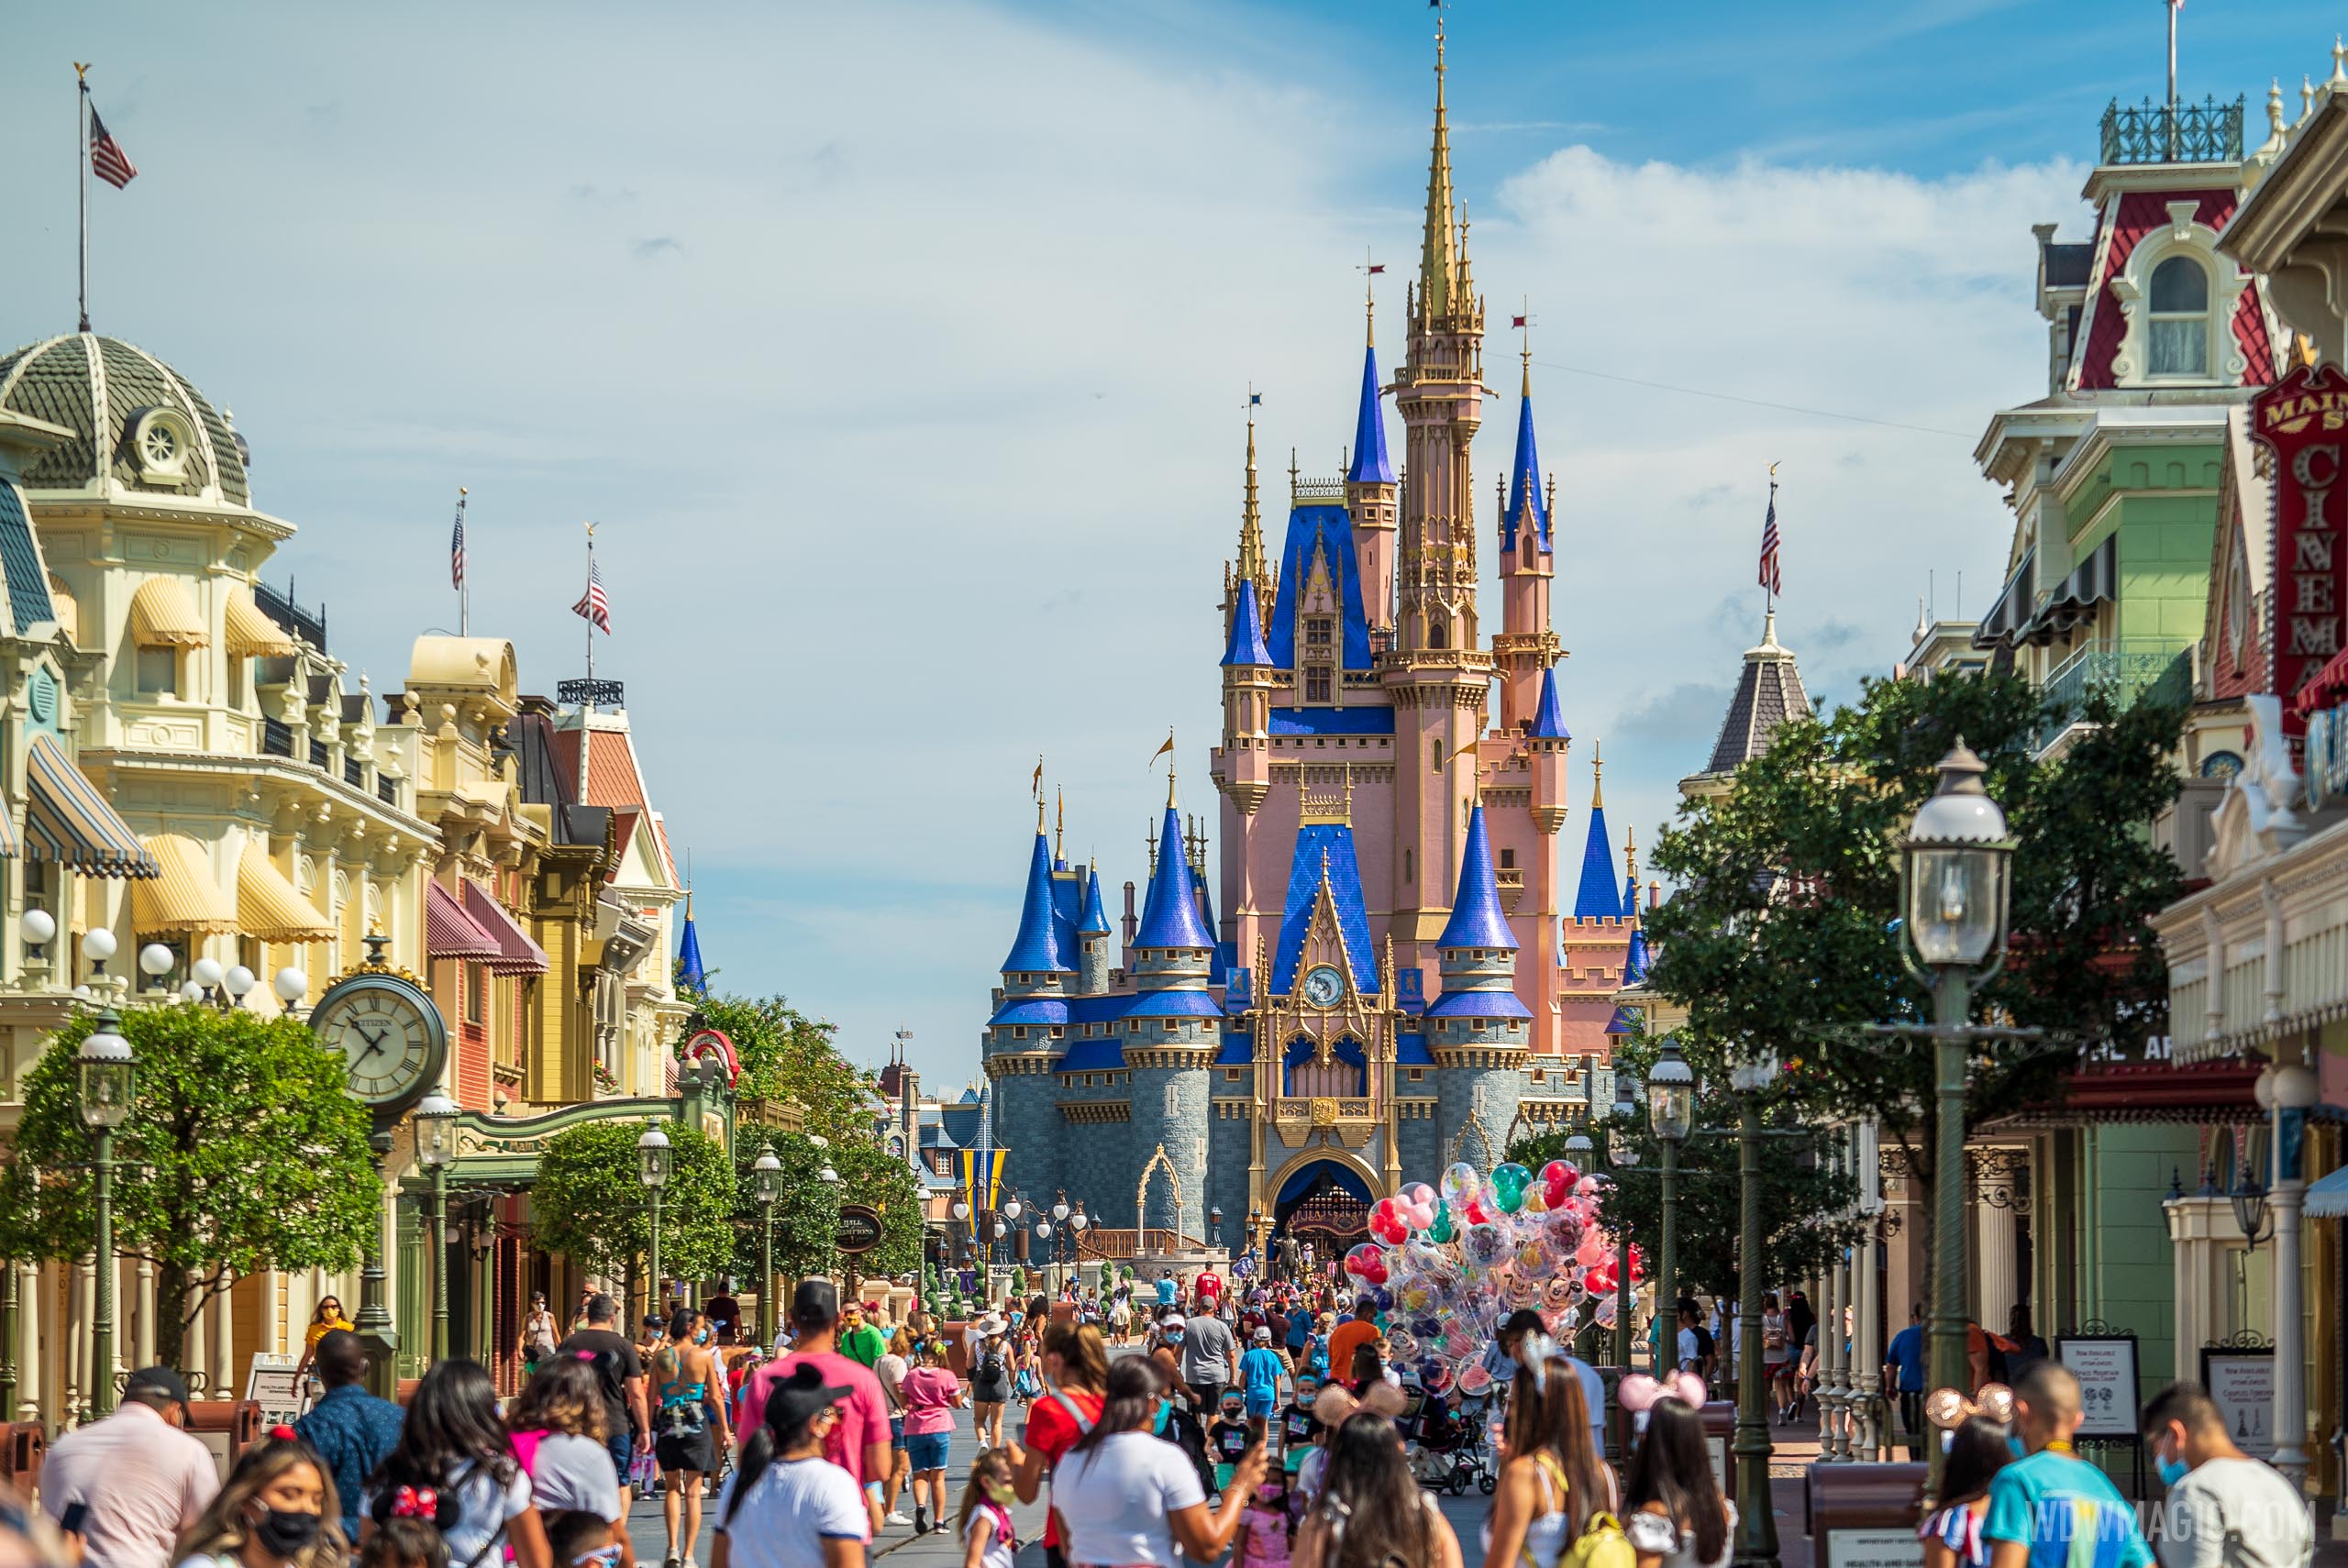 Guests are returning to Walt Disney World in greater numbers, but restrictions may be coming